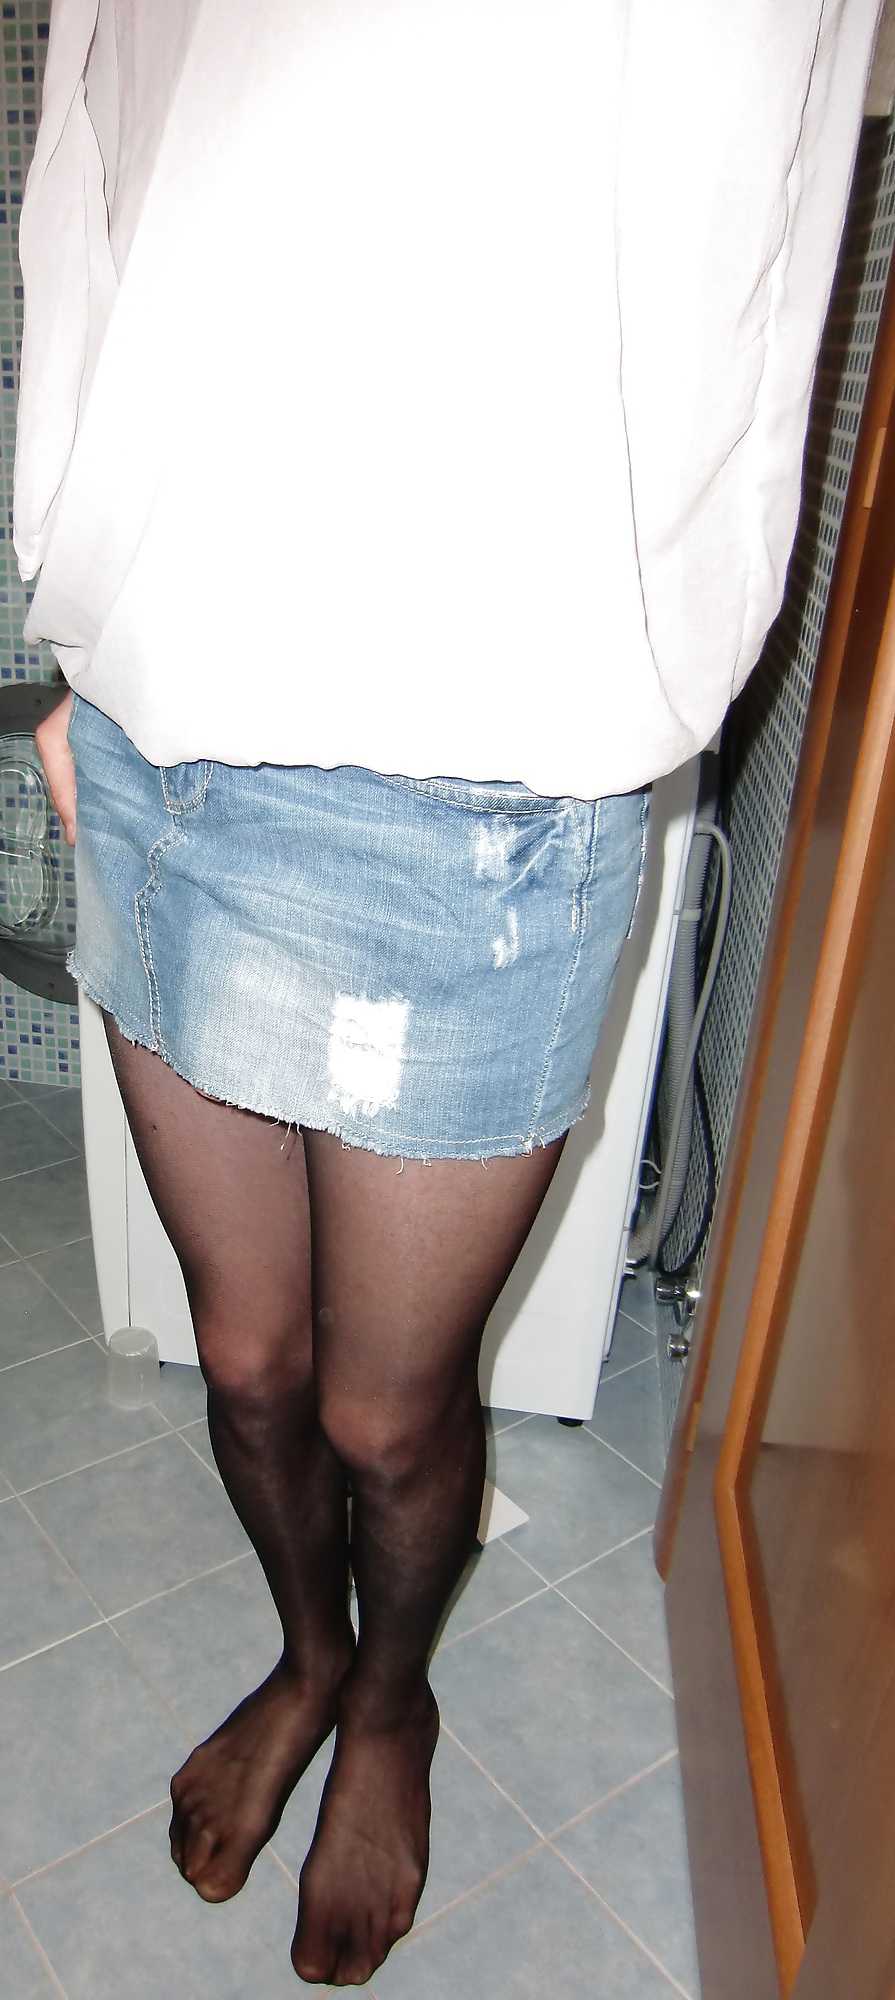 Marta shemale in a denim skirt and stockings #3425077